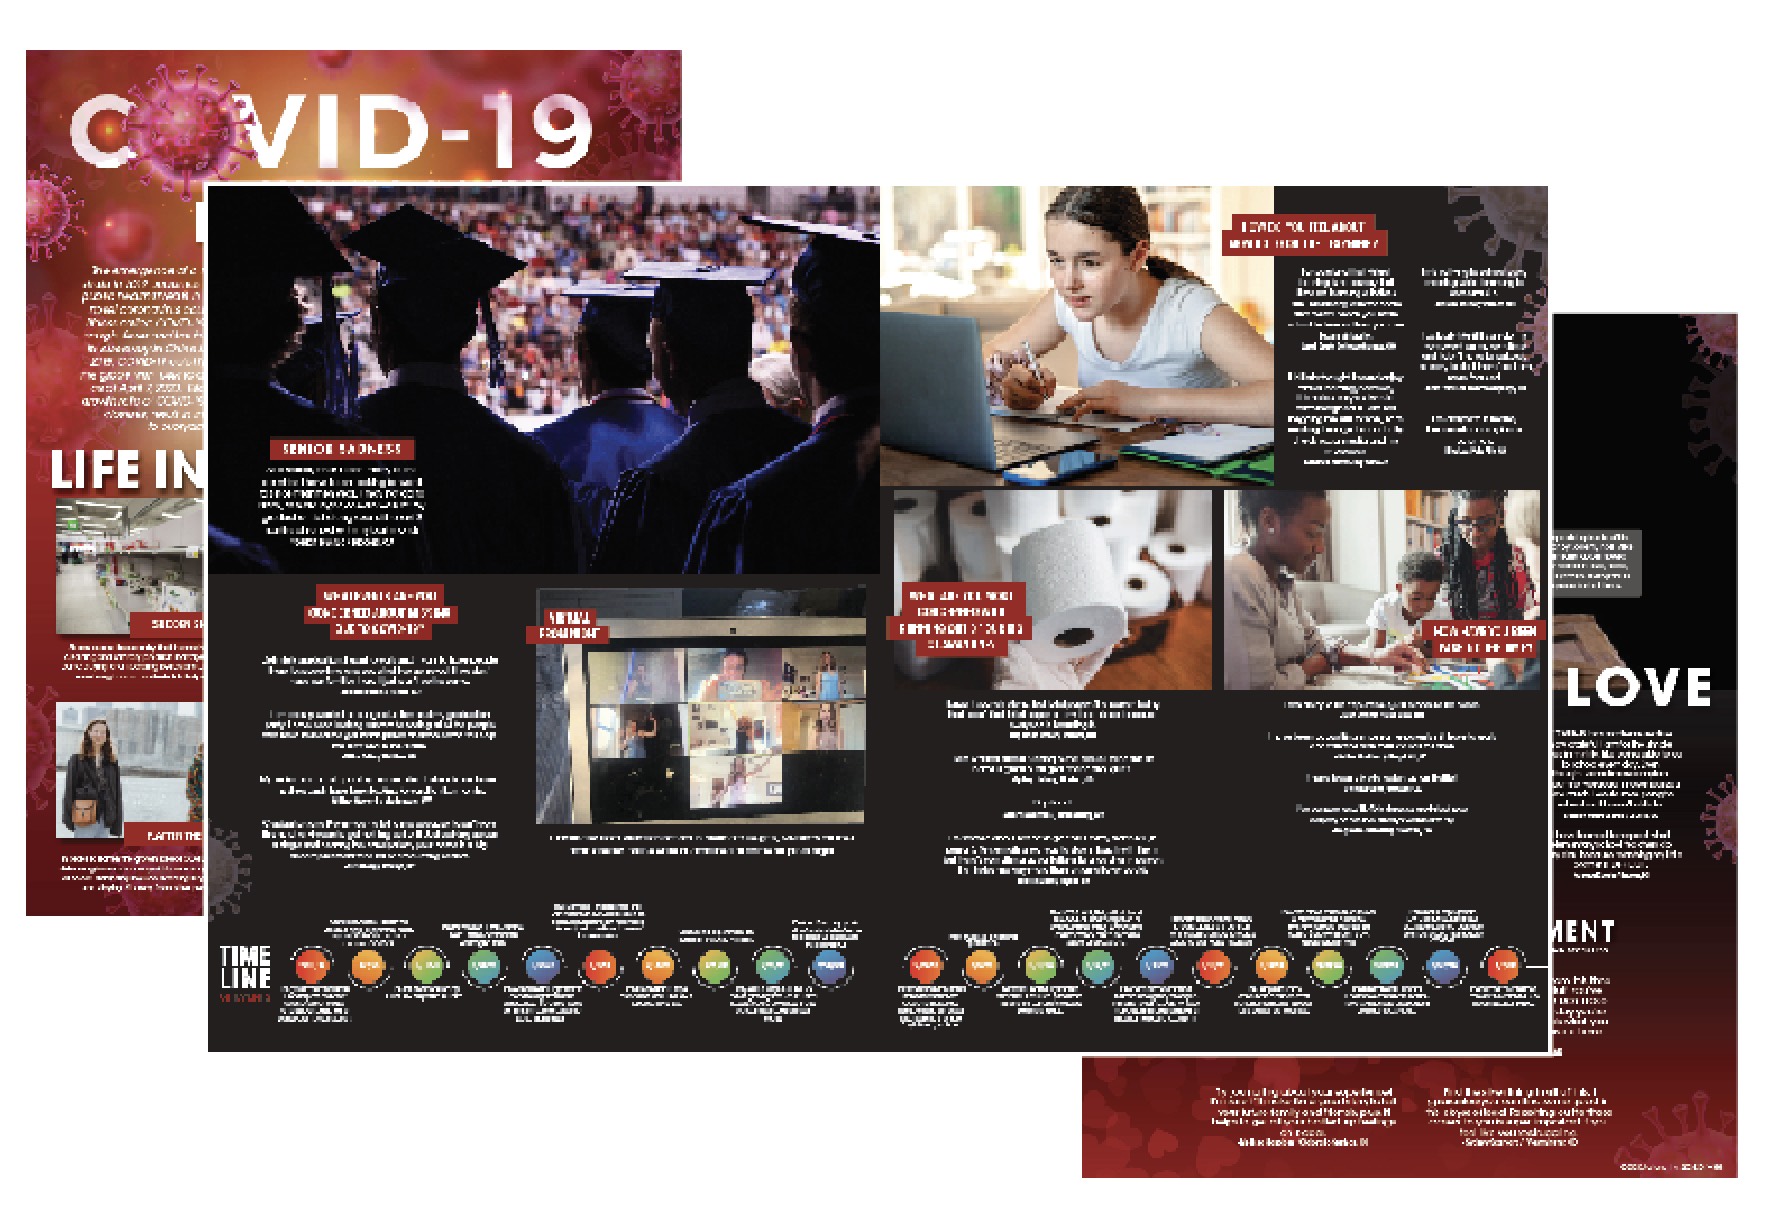 Jostens is providing free yearbook page designs to help schools document the insights and impacts of COVID-19. 